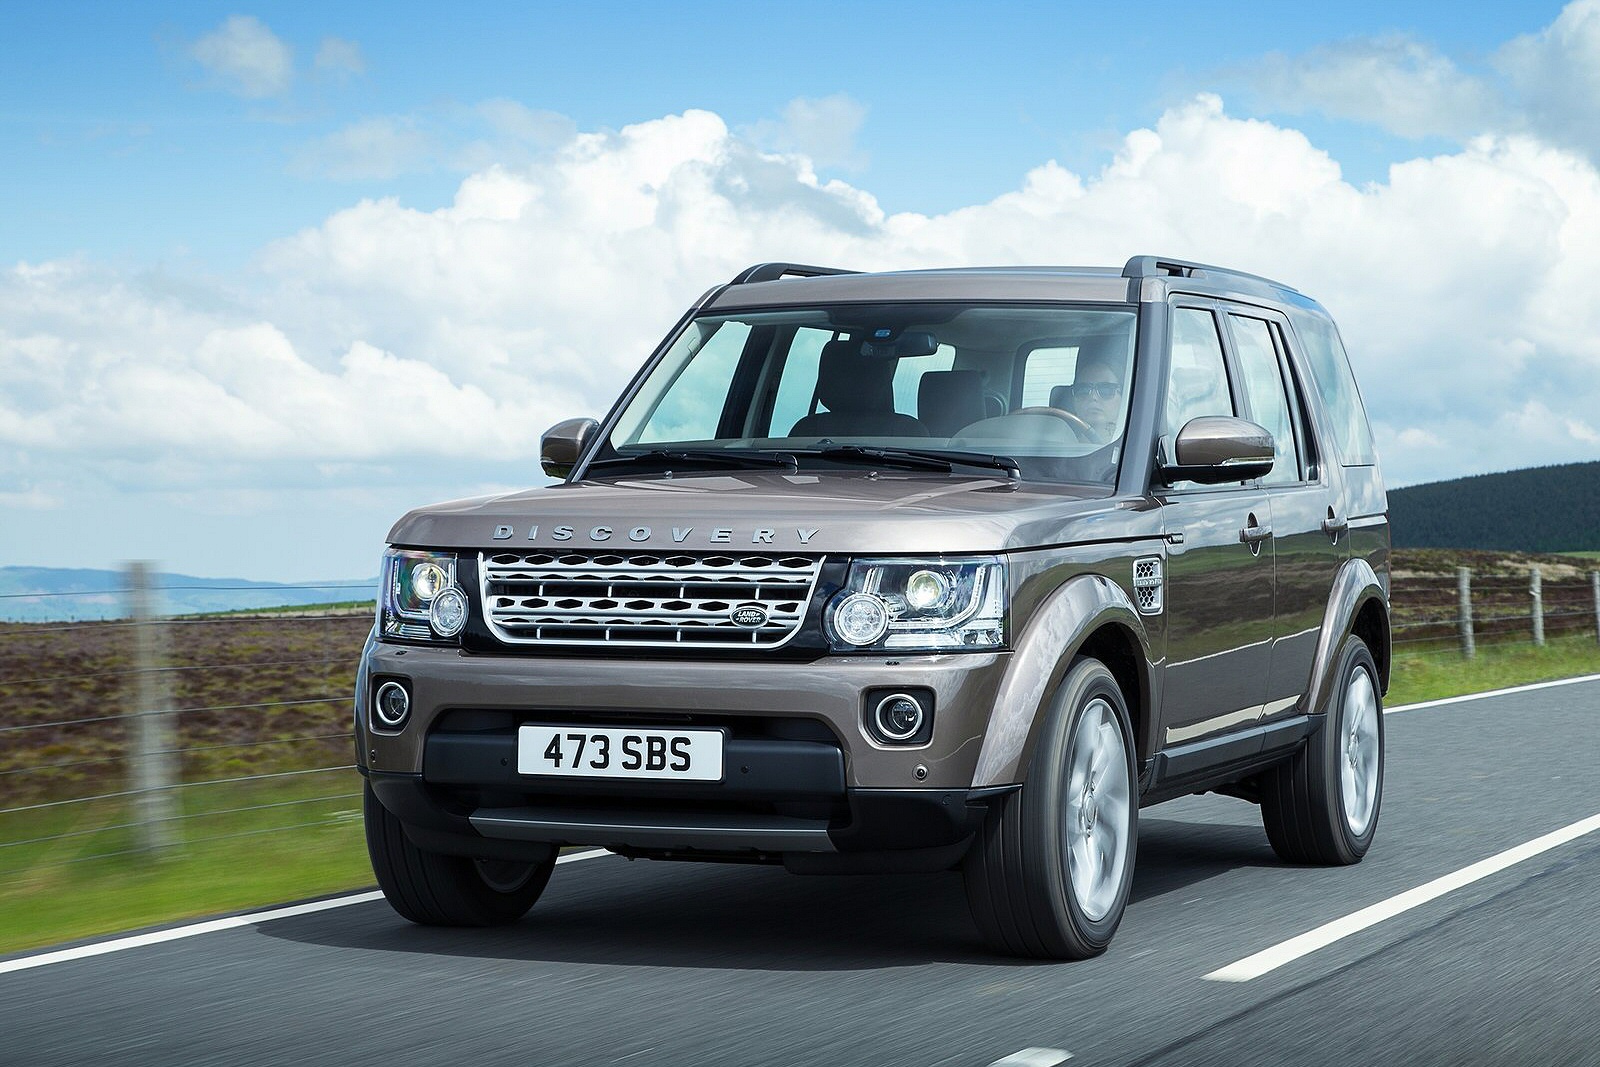 2014 Land Rover Discovery Review [Video] | OSV
 2014 Land Rover Discovery Wallpaper